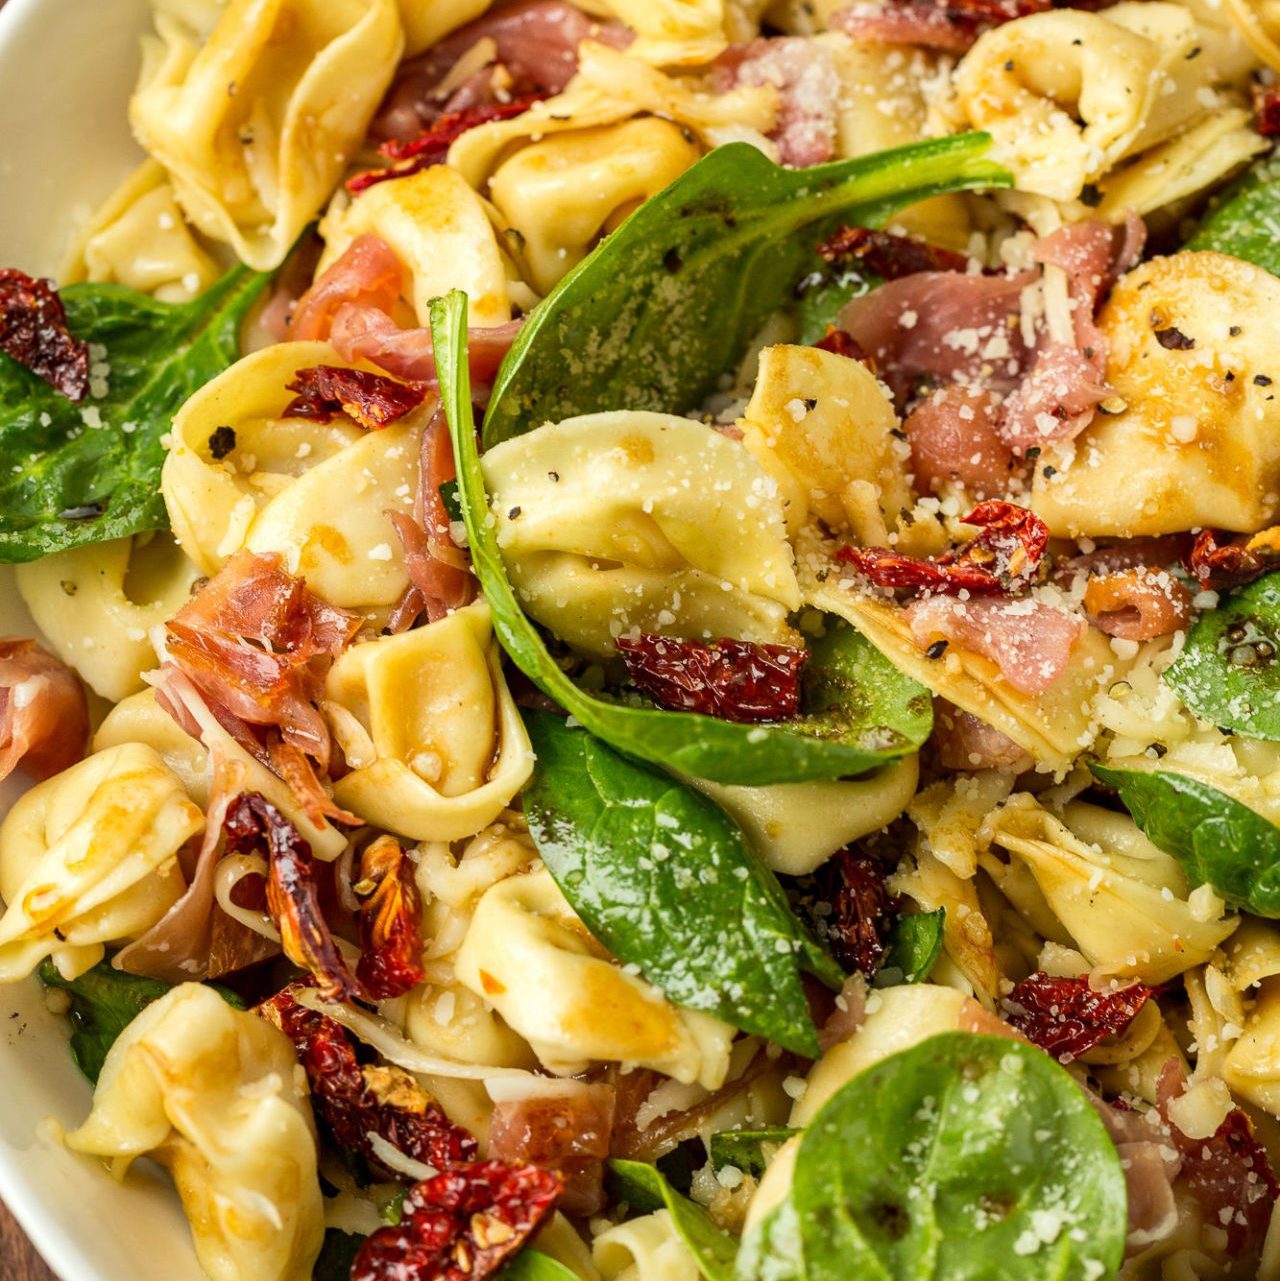 Tuscan Tortellini Salad - The Best Video Recipes for All